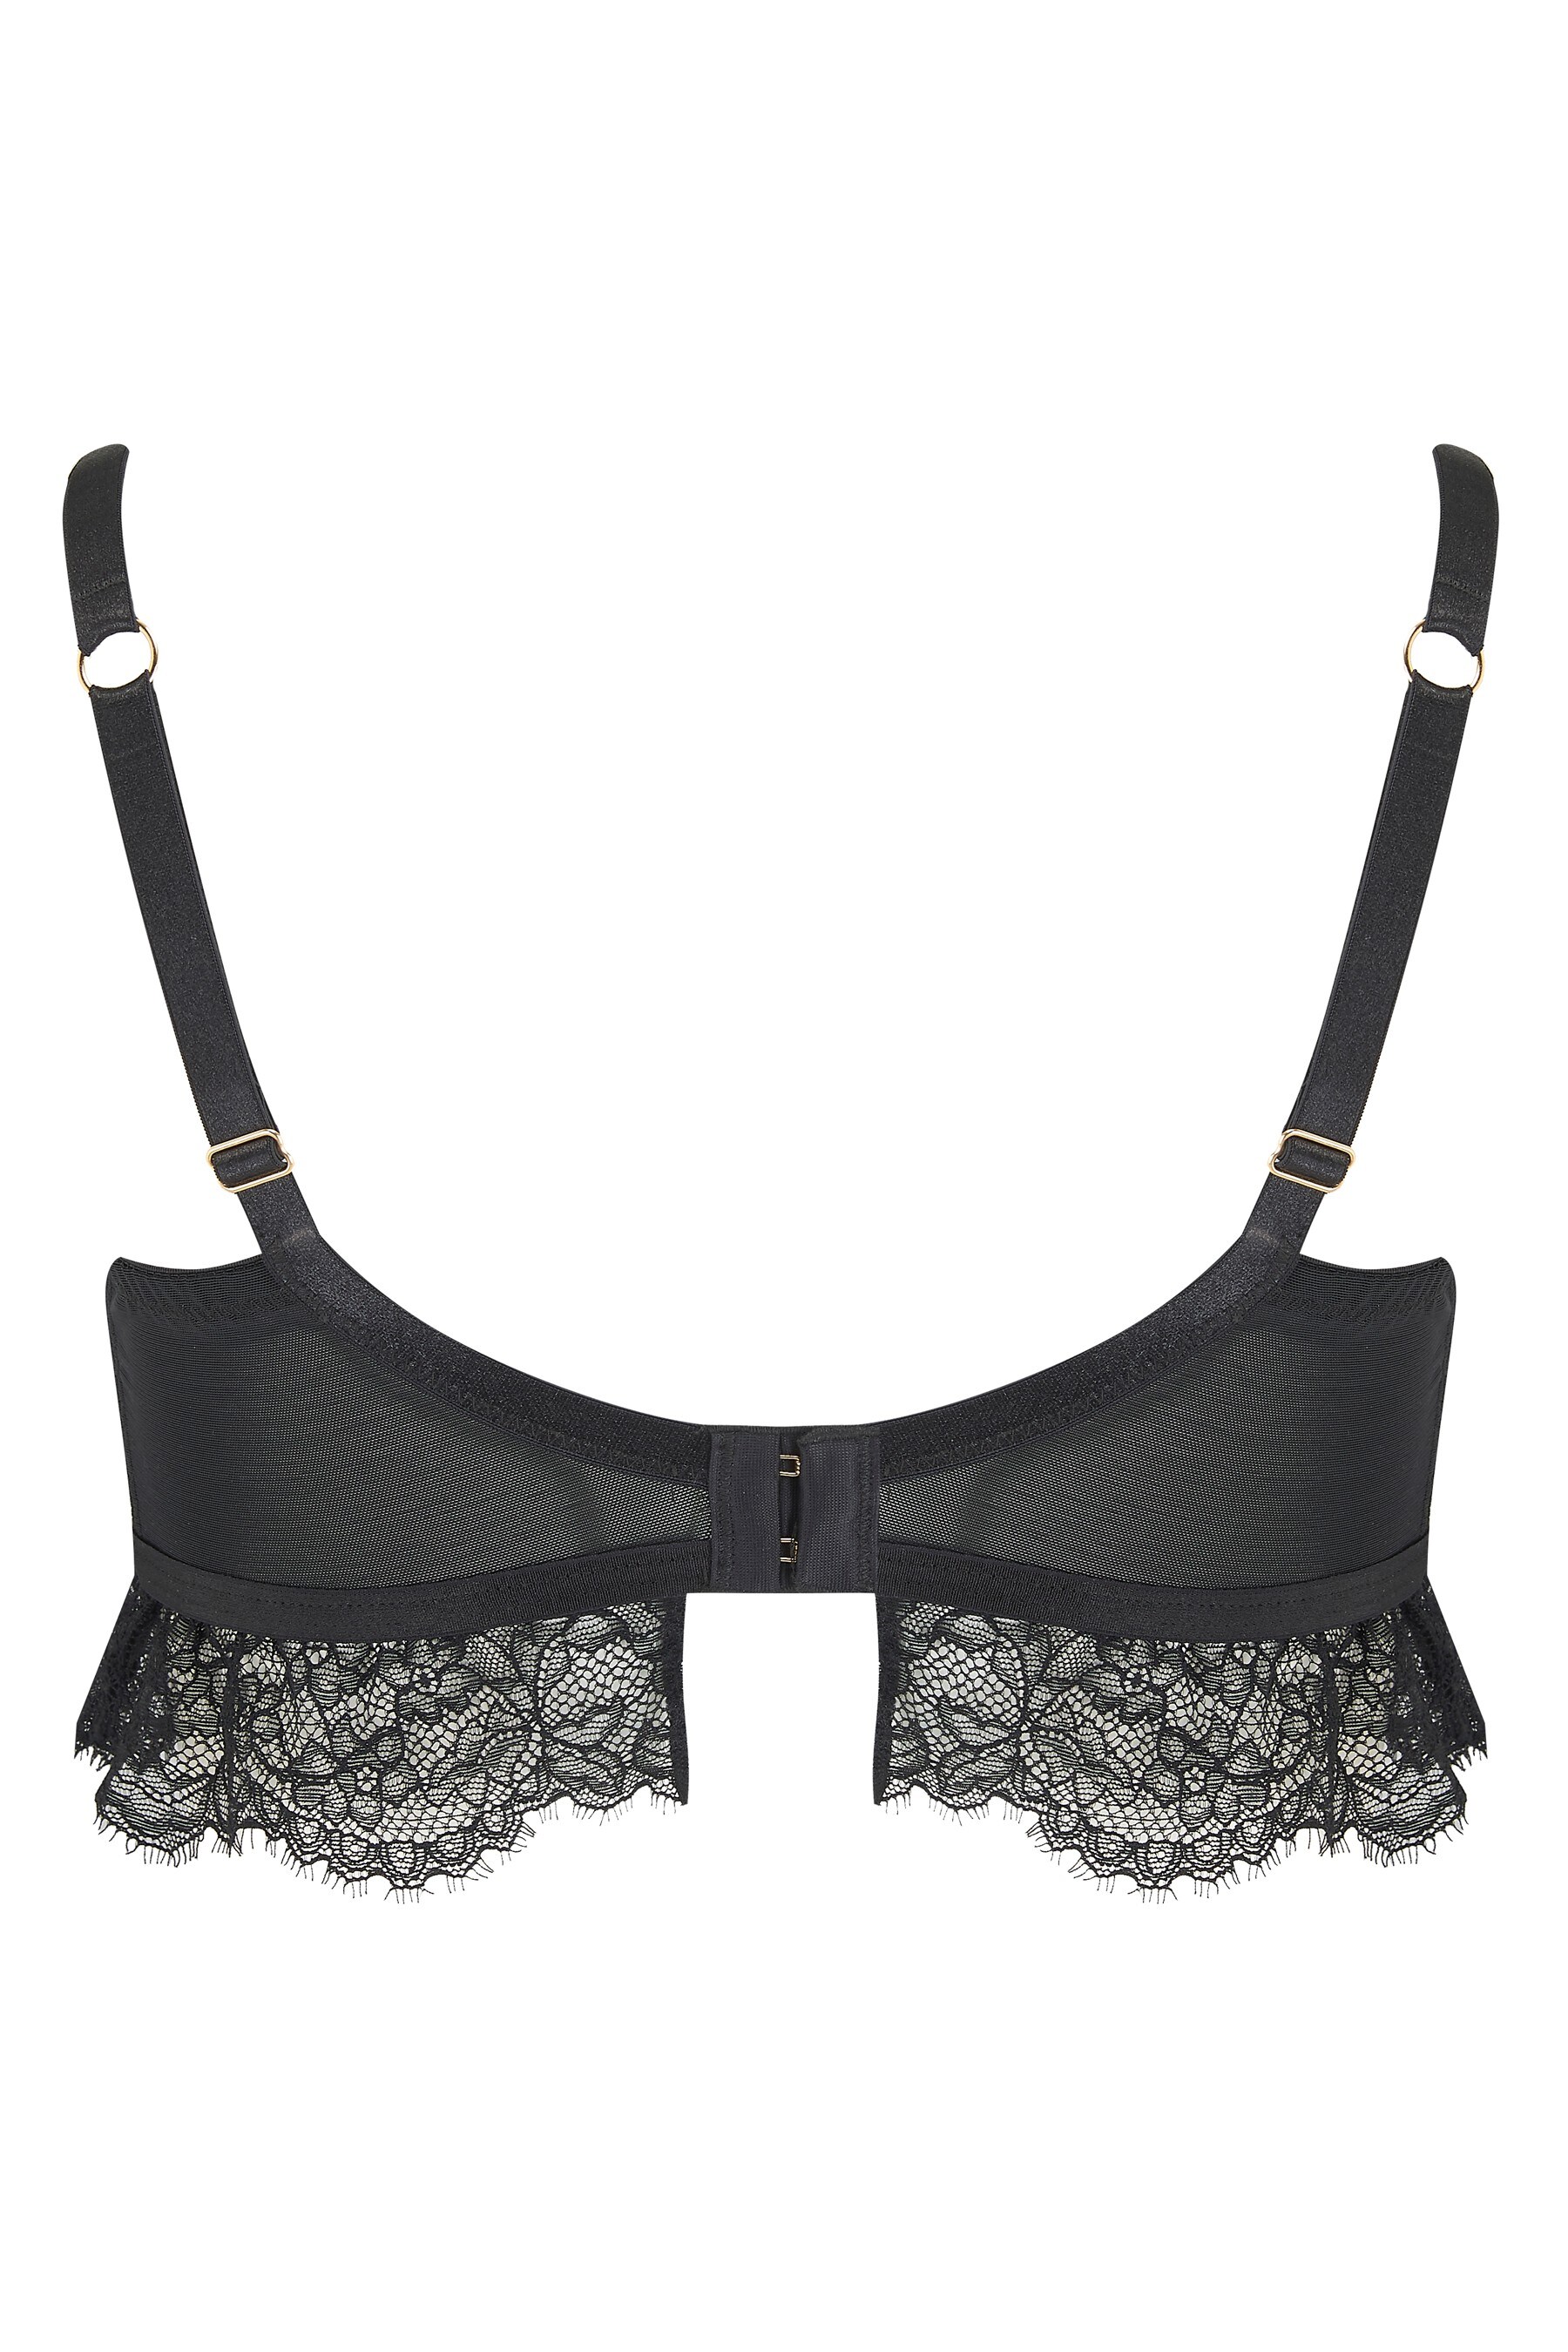 Buy Pour Moi Black India Padded Demi Bra E+ from the Next UK online shop